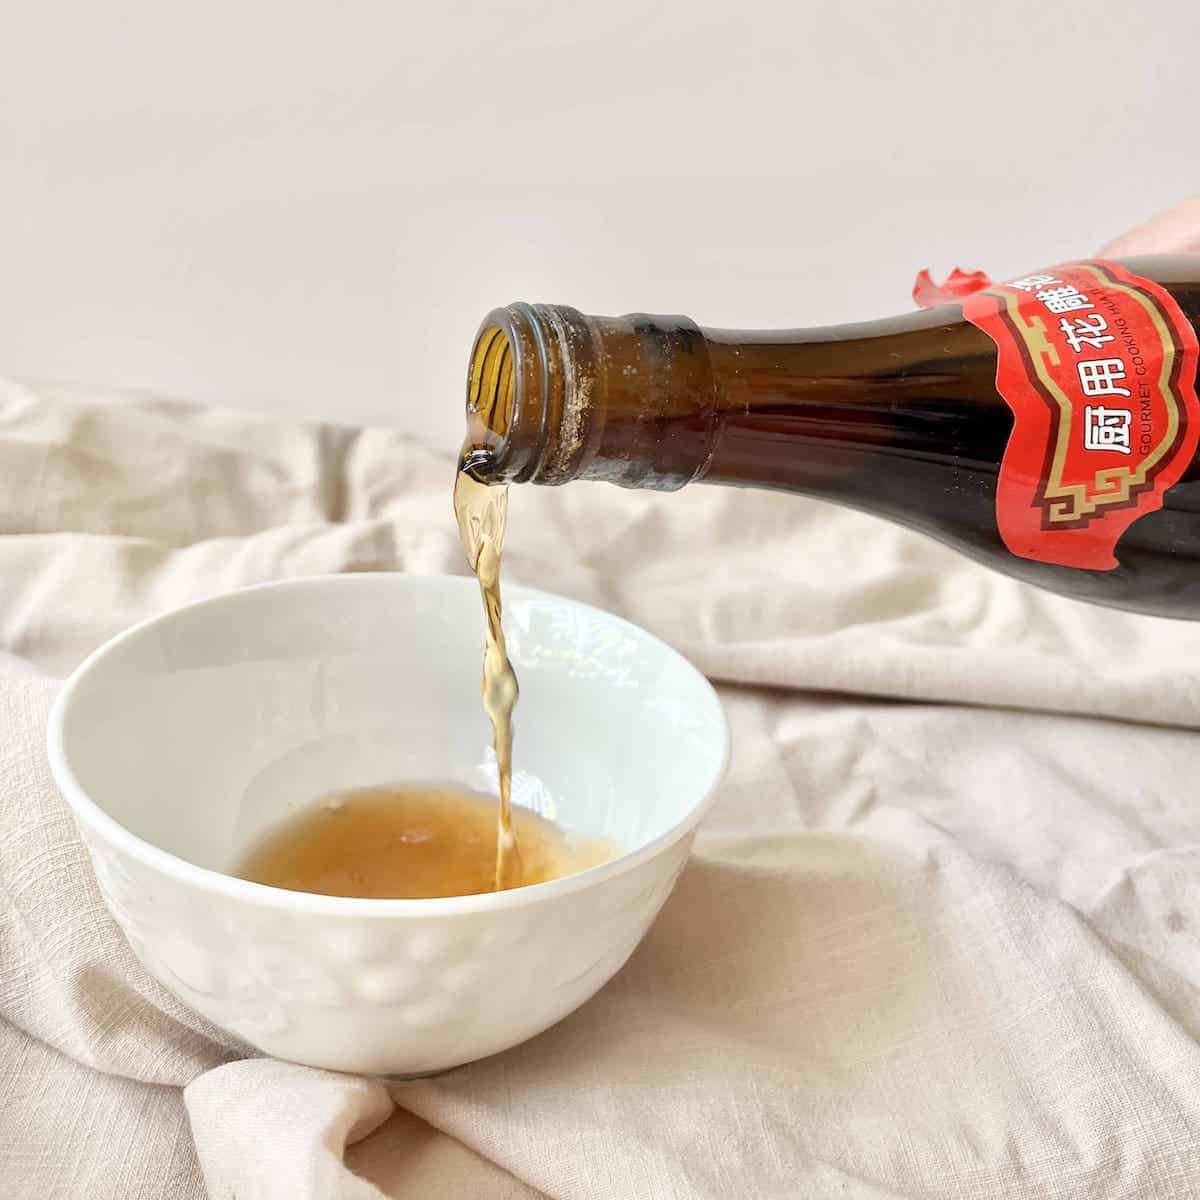 Pouring Chinese rice wine into a bowl.